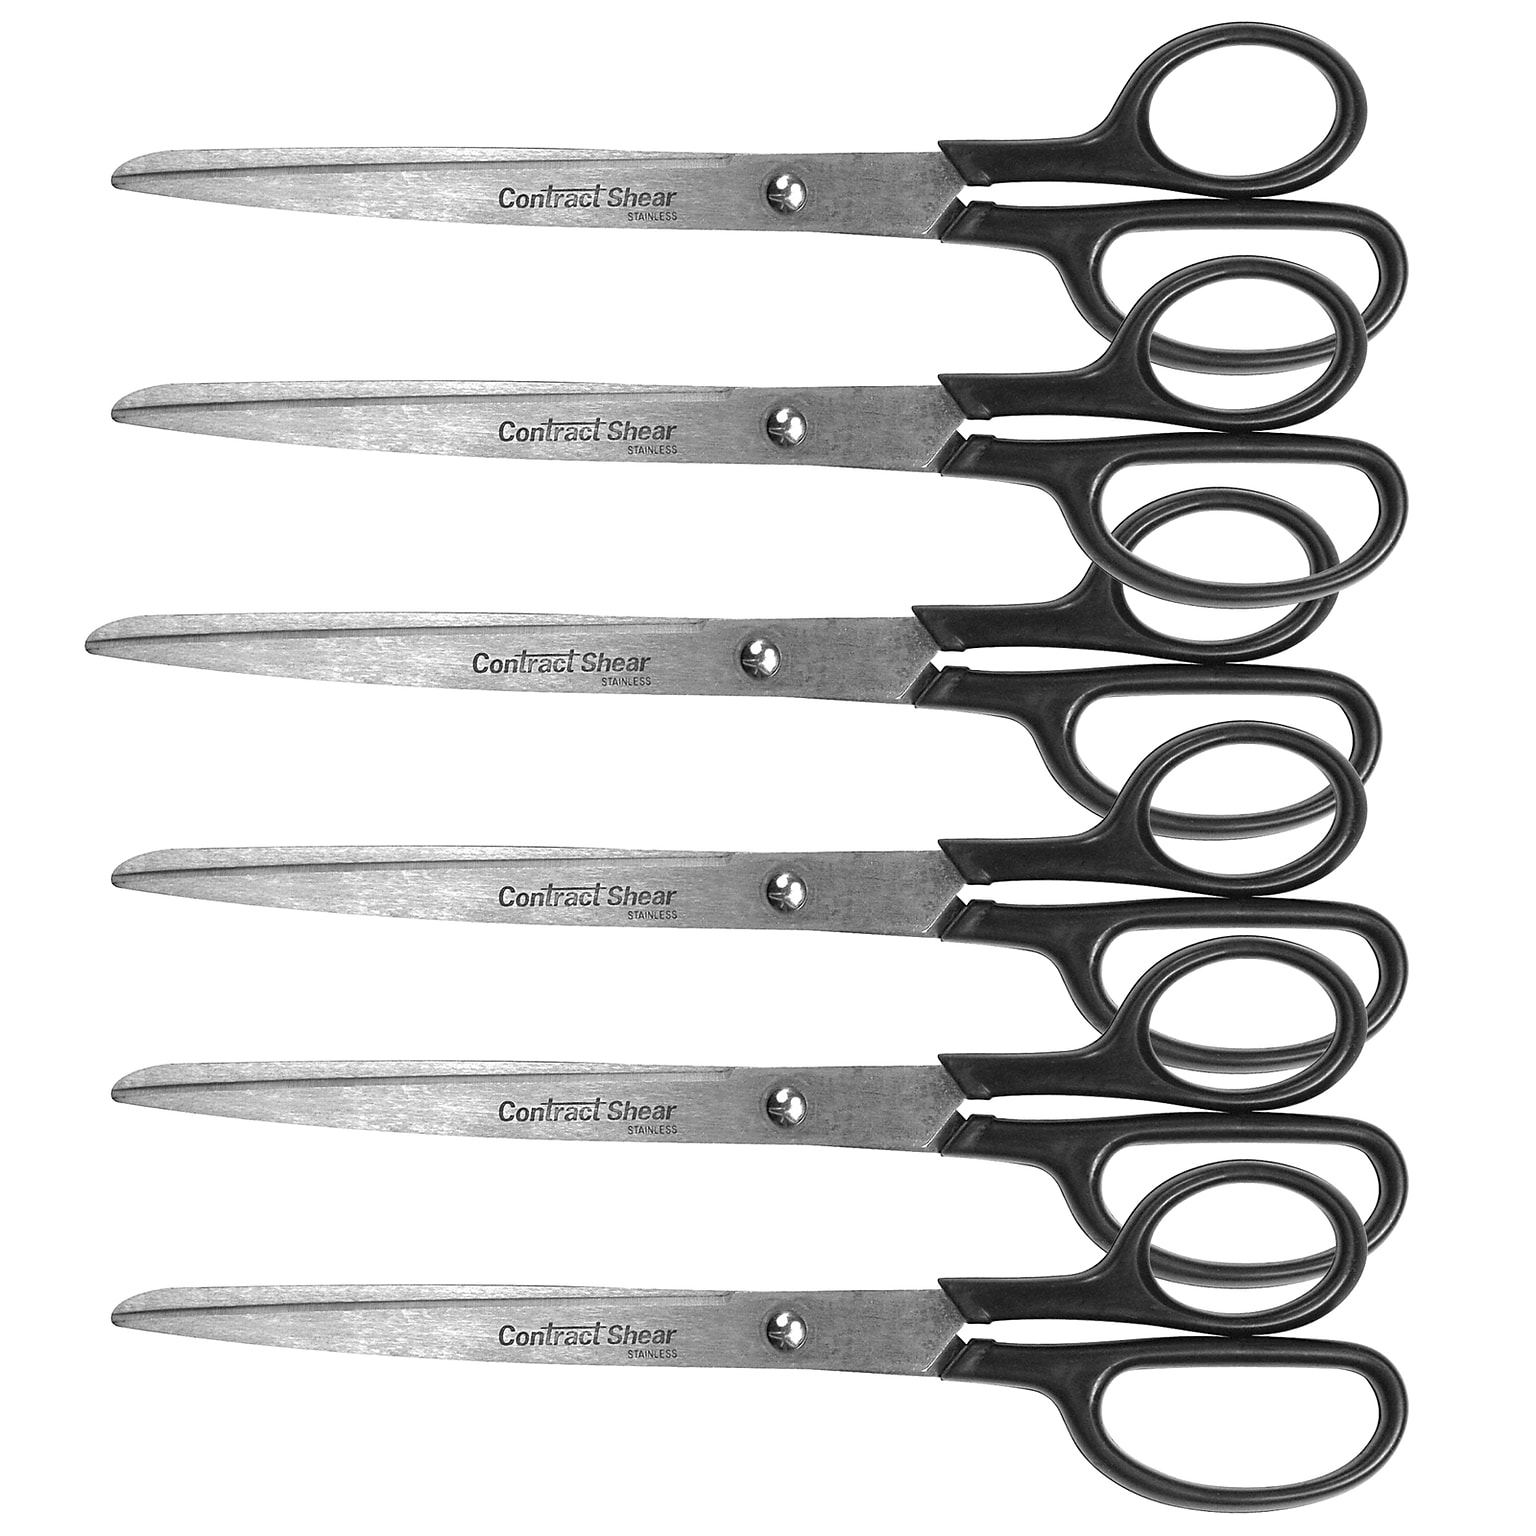 Westcott Contract Shear 9 Straight Stainless Steel Scissors, Pointed Tip, Black Handle, Pack of 6 (ACM10573-6)